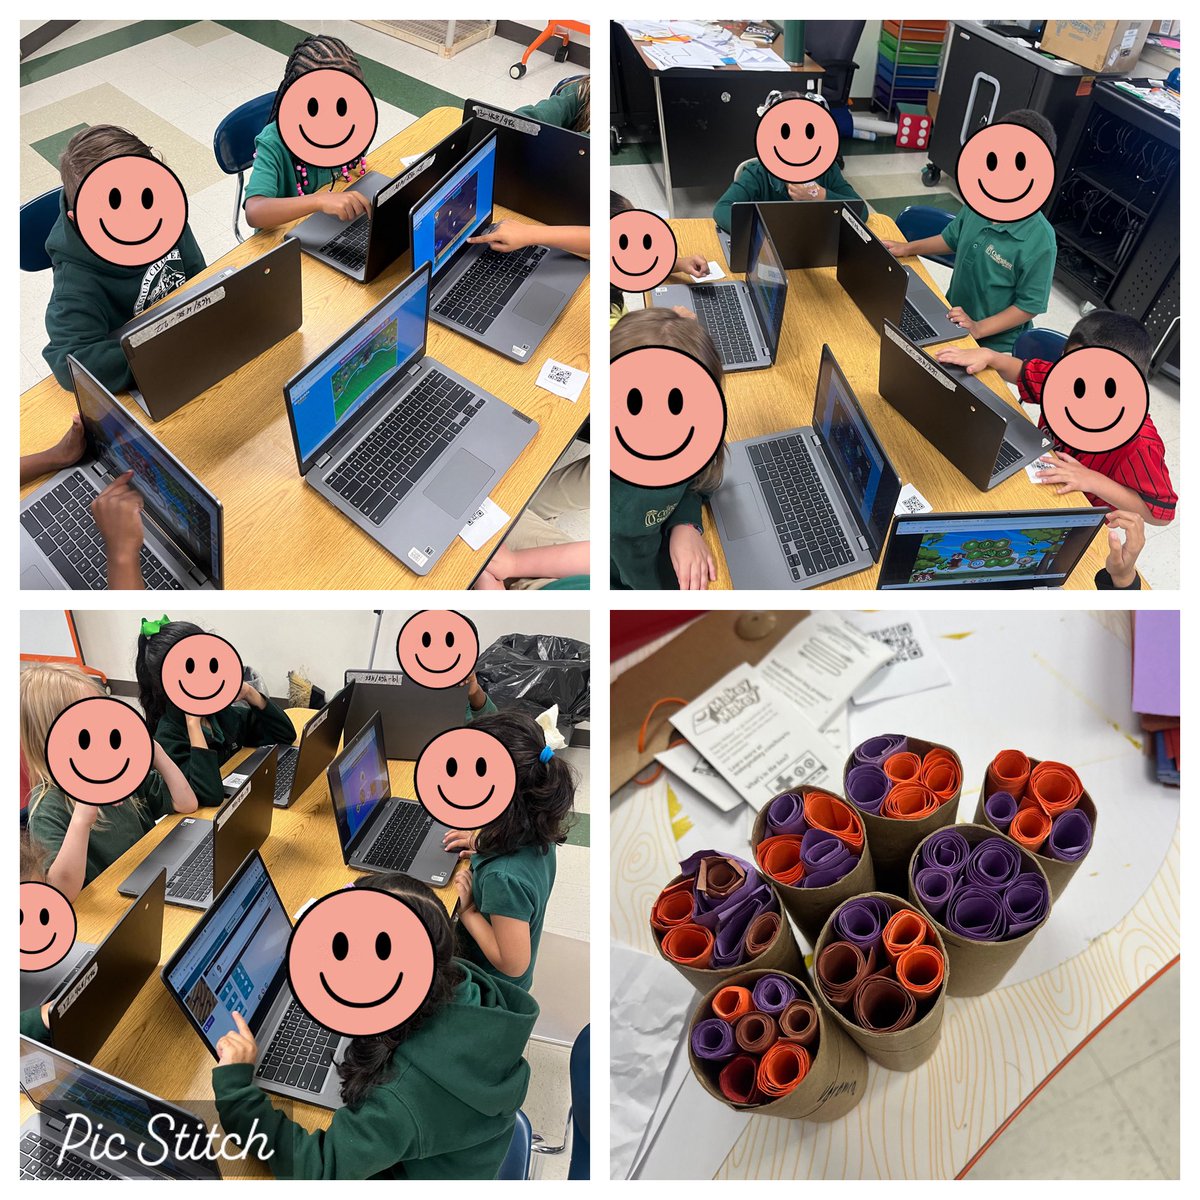 Today my #Kindergarten students work on @typetastic_com, @codeorg and @kodable. They had so much fun being able to choose which one they wanted to work on! Then my #second graders worked on making a #bee hotel with #recycled materials. #STEMinPA #teacher #STEM #EnvironmentalEd